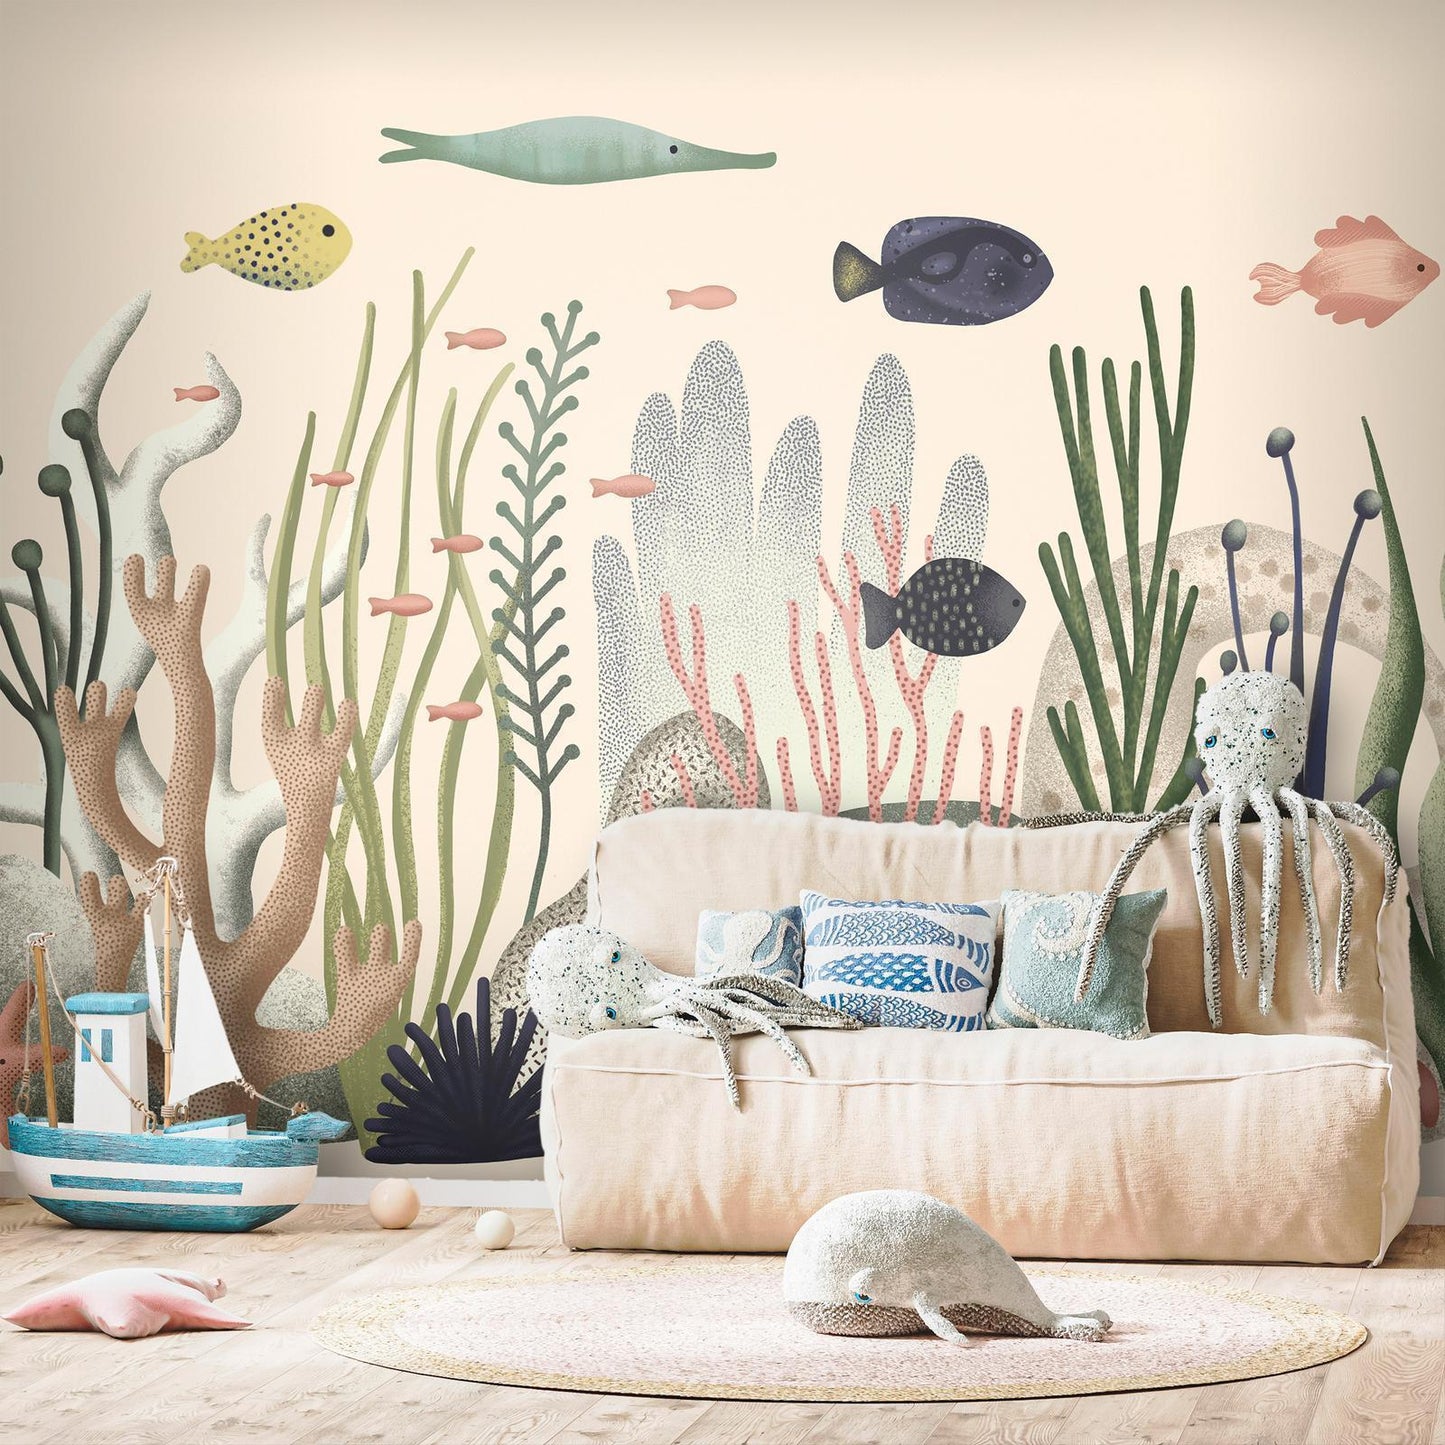 Fotobehang - Underwater World - Fish and Corals in Pastel Colours